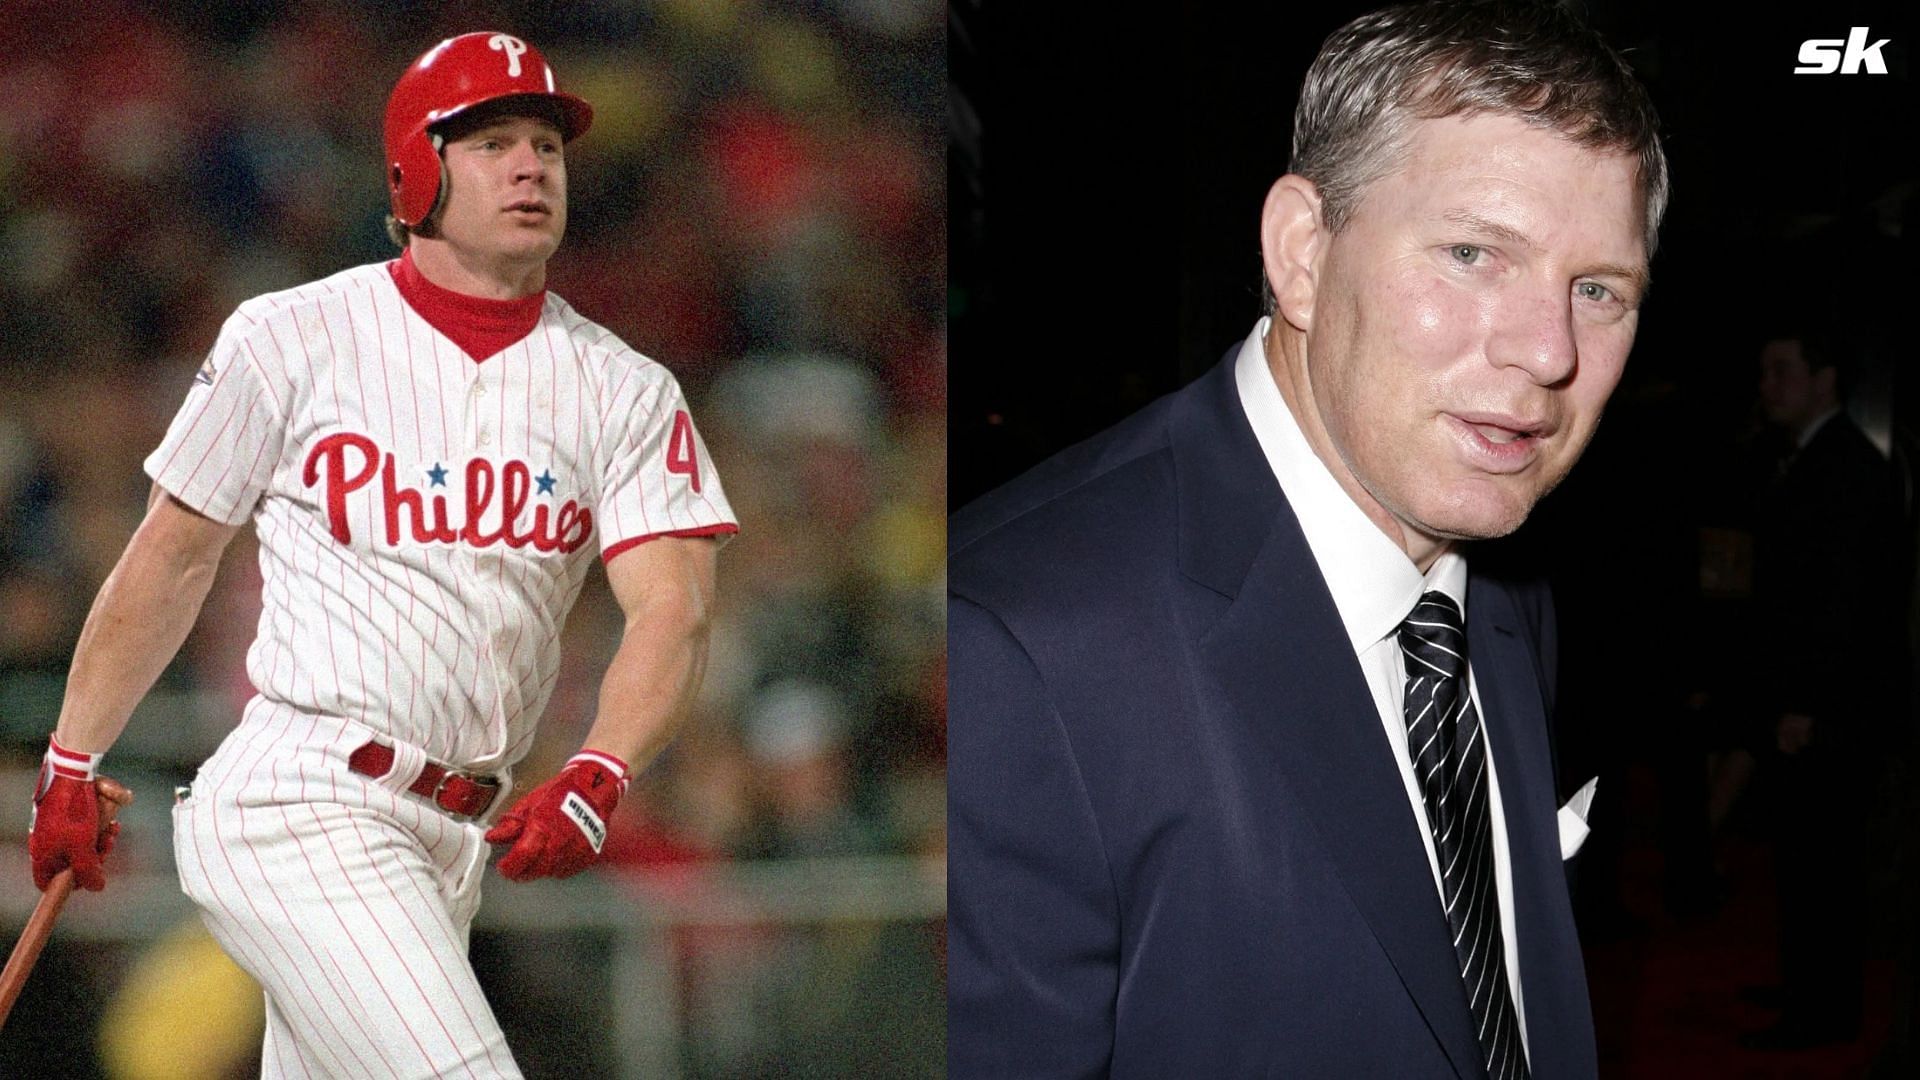 Ron Darling Courts Opinion On Mlb Legend Lenny Dykstra In 2020 Dykstra Was Infamous For